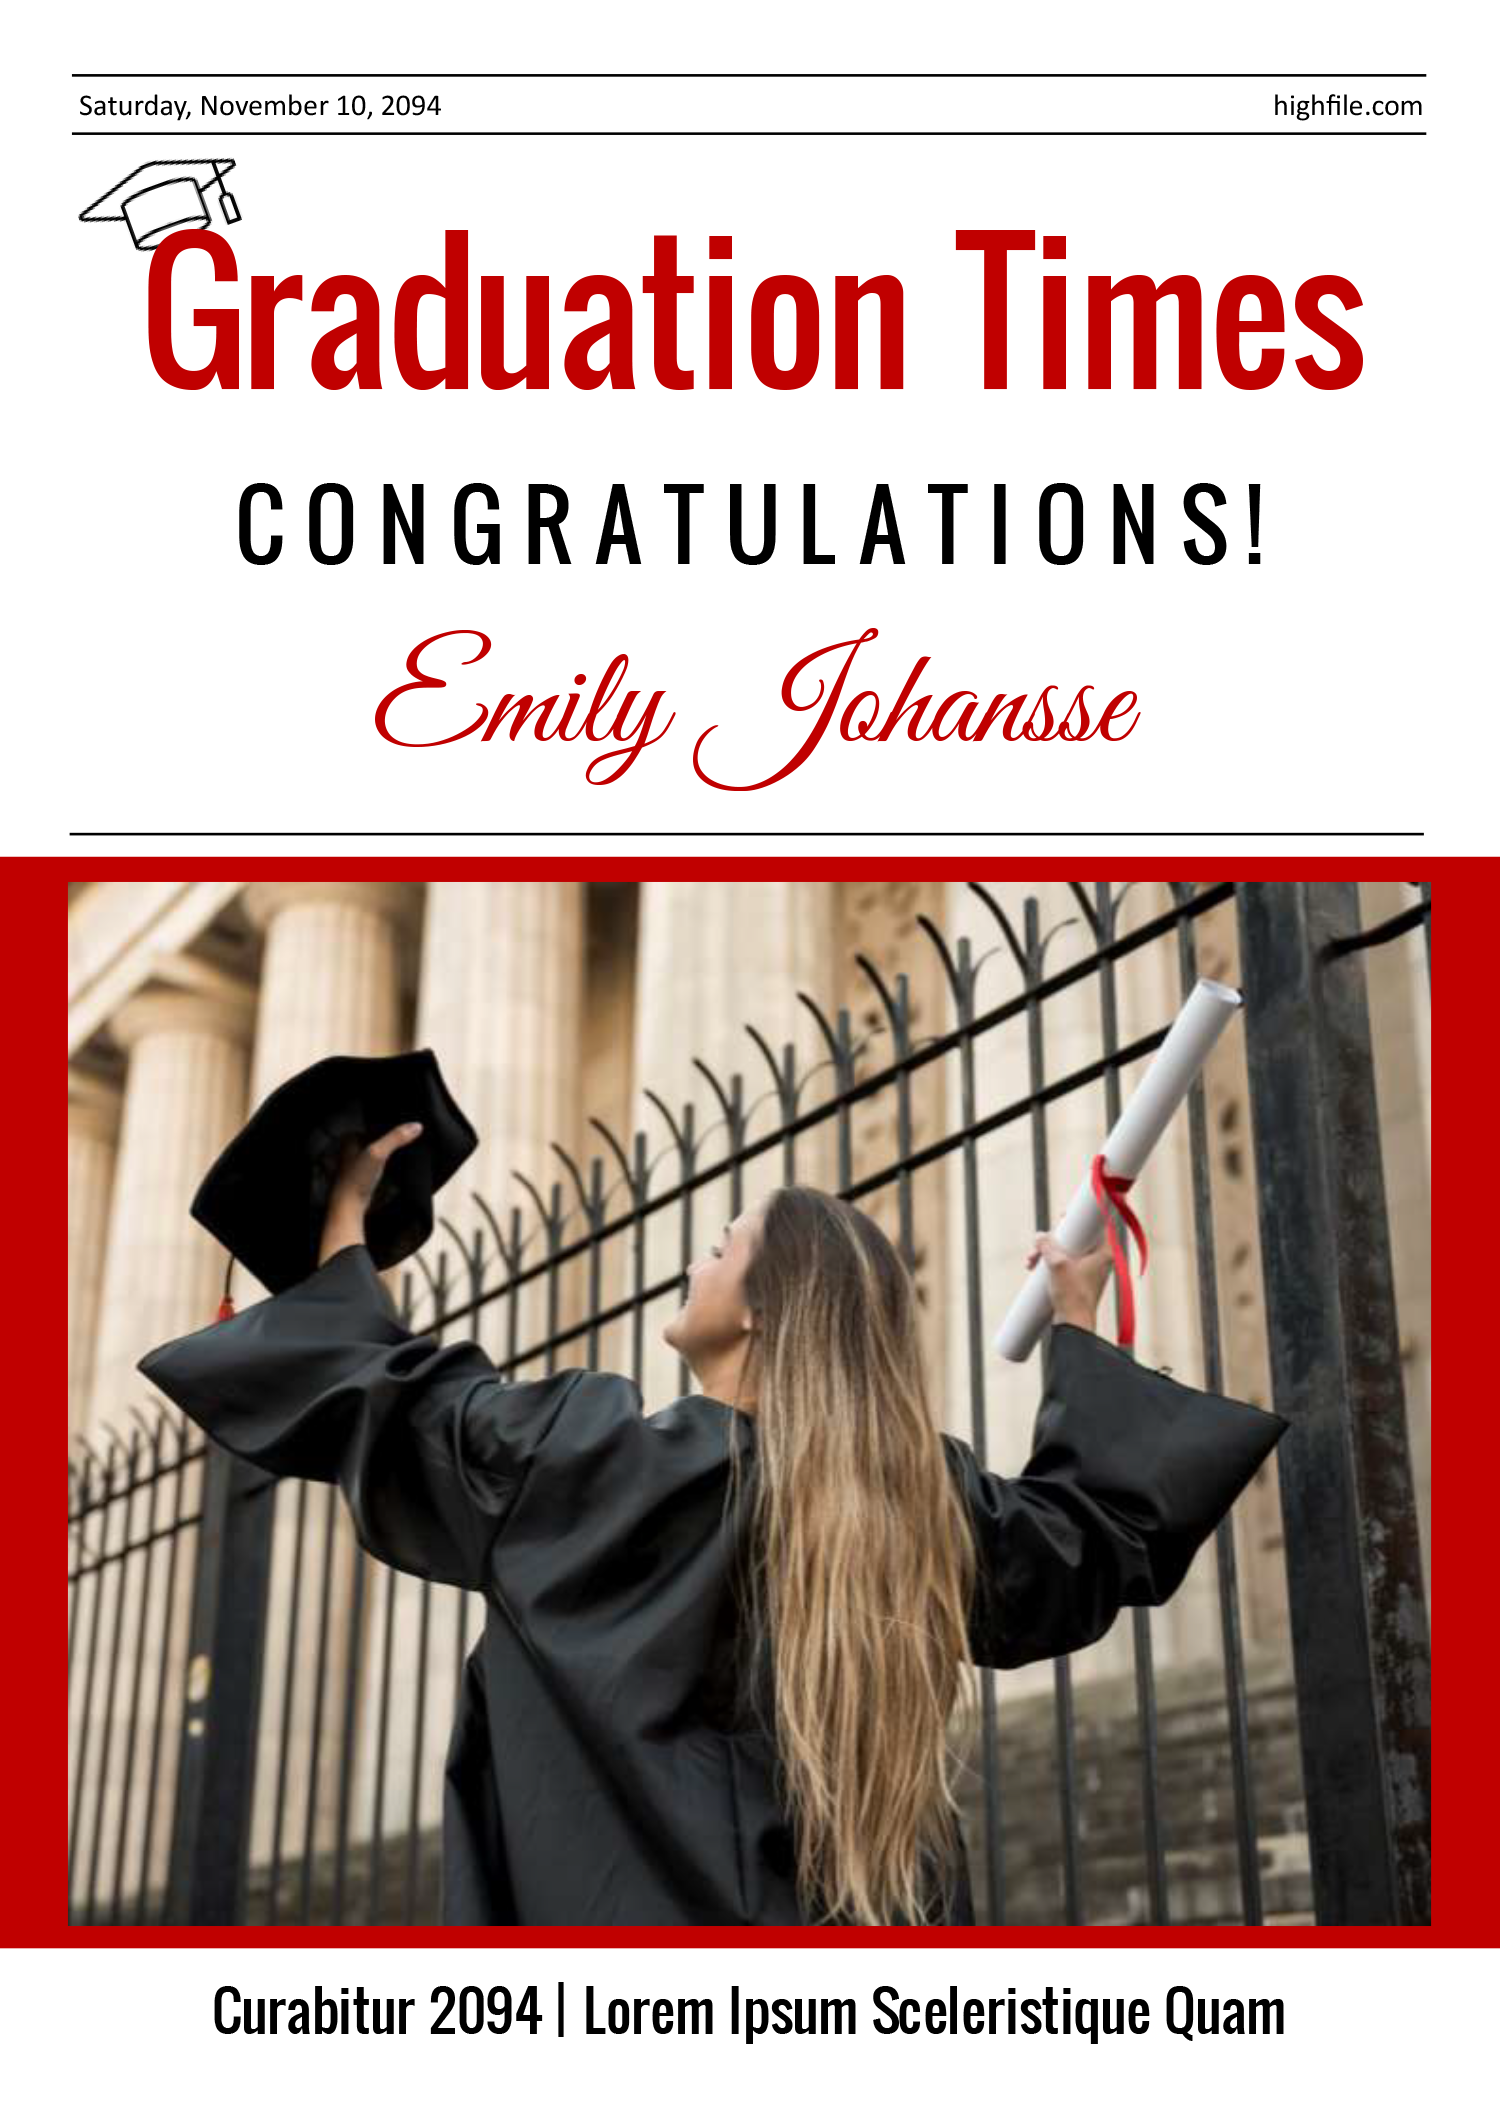 Graduation Newspaper Template - Front Page